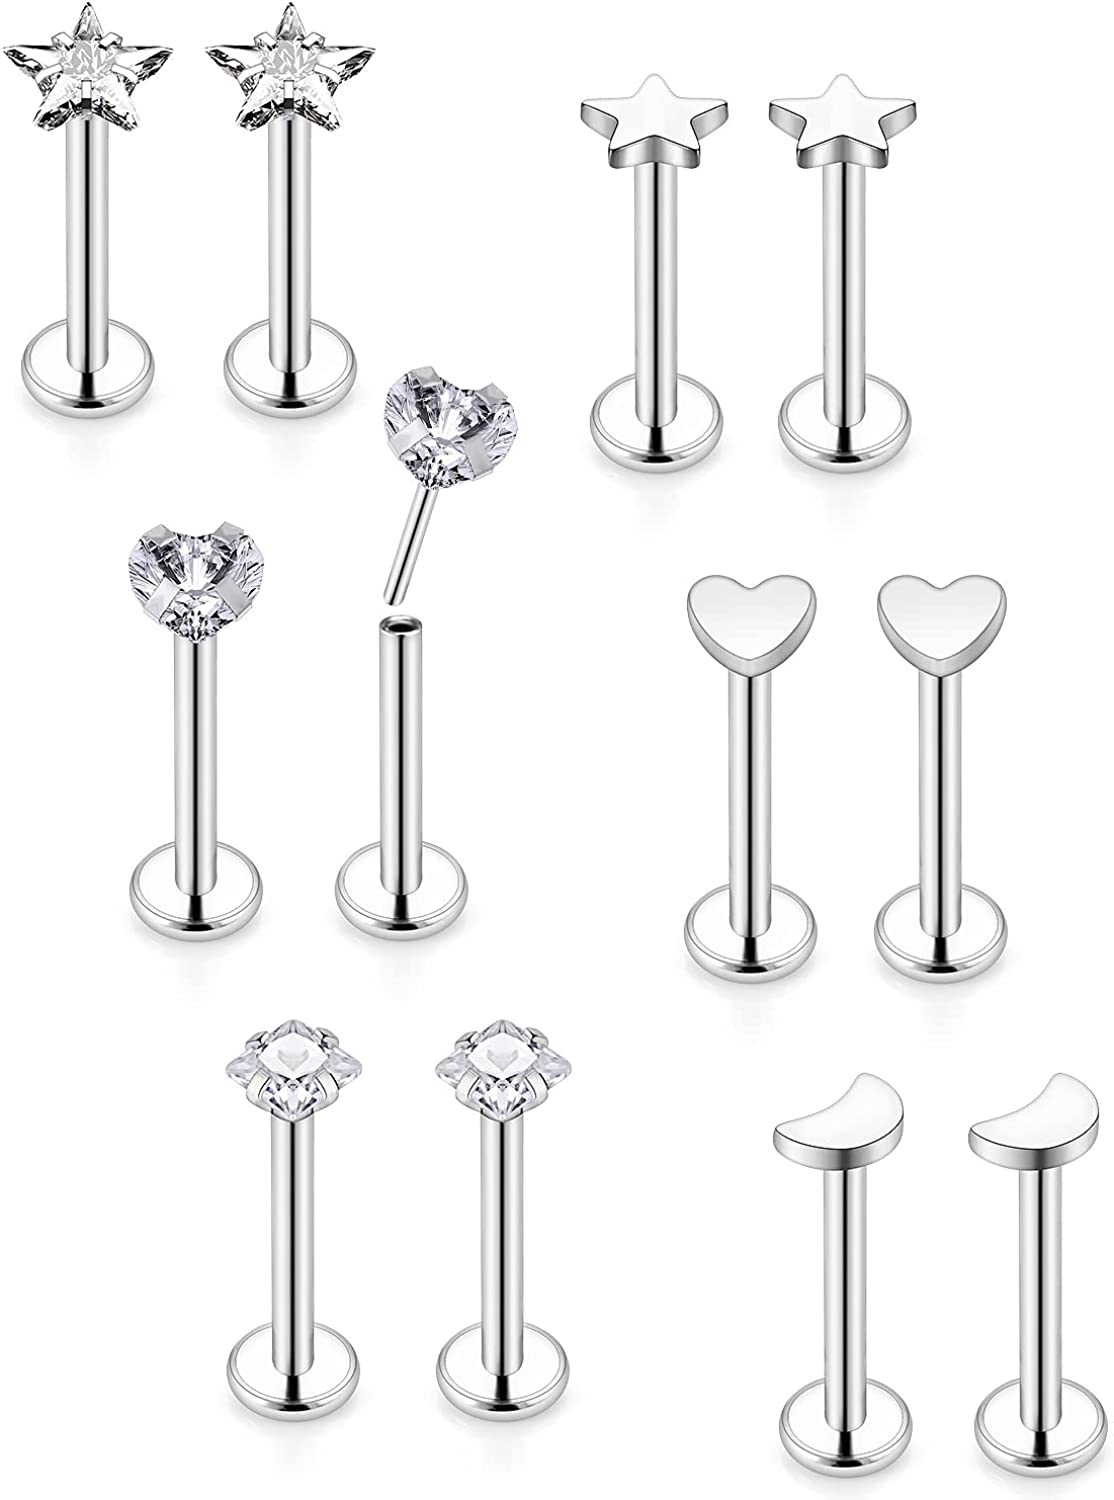 Vsnnsns 20G 18G 16G Push in Lip Rings Stainless Surgical Steel Labret Jewelry Monroe Lip Rings Nail Cartilage Tragus Helix Earrings Studs Nose Ring Medusa Piercing Jewelry for Women Men 6 Pairs